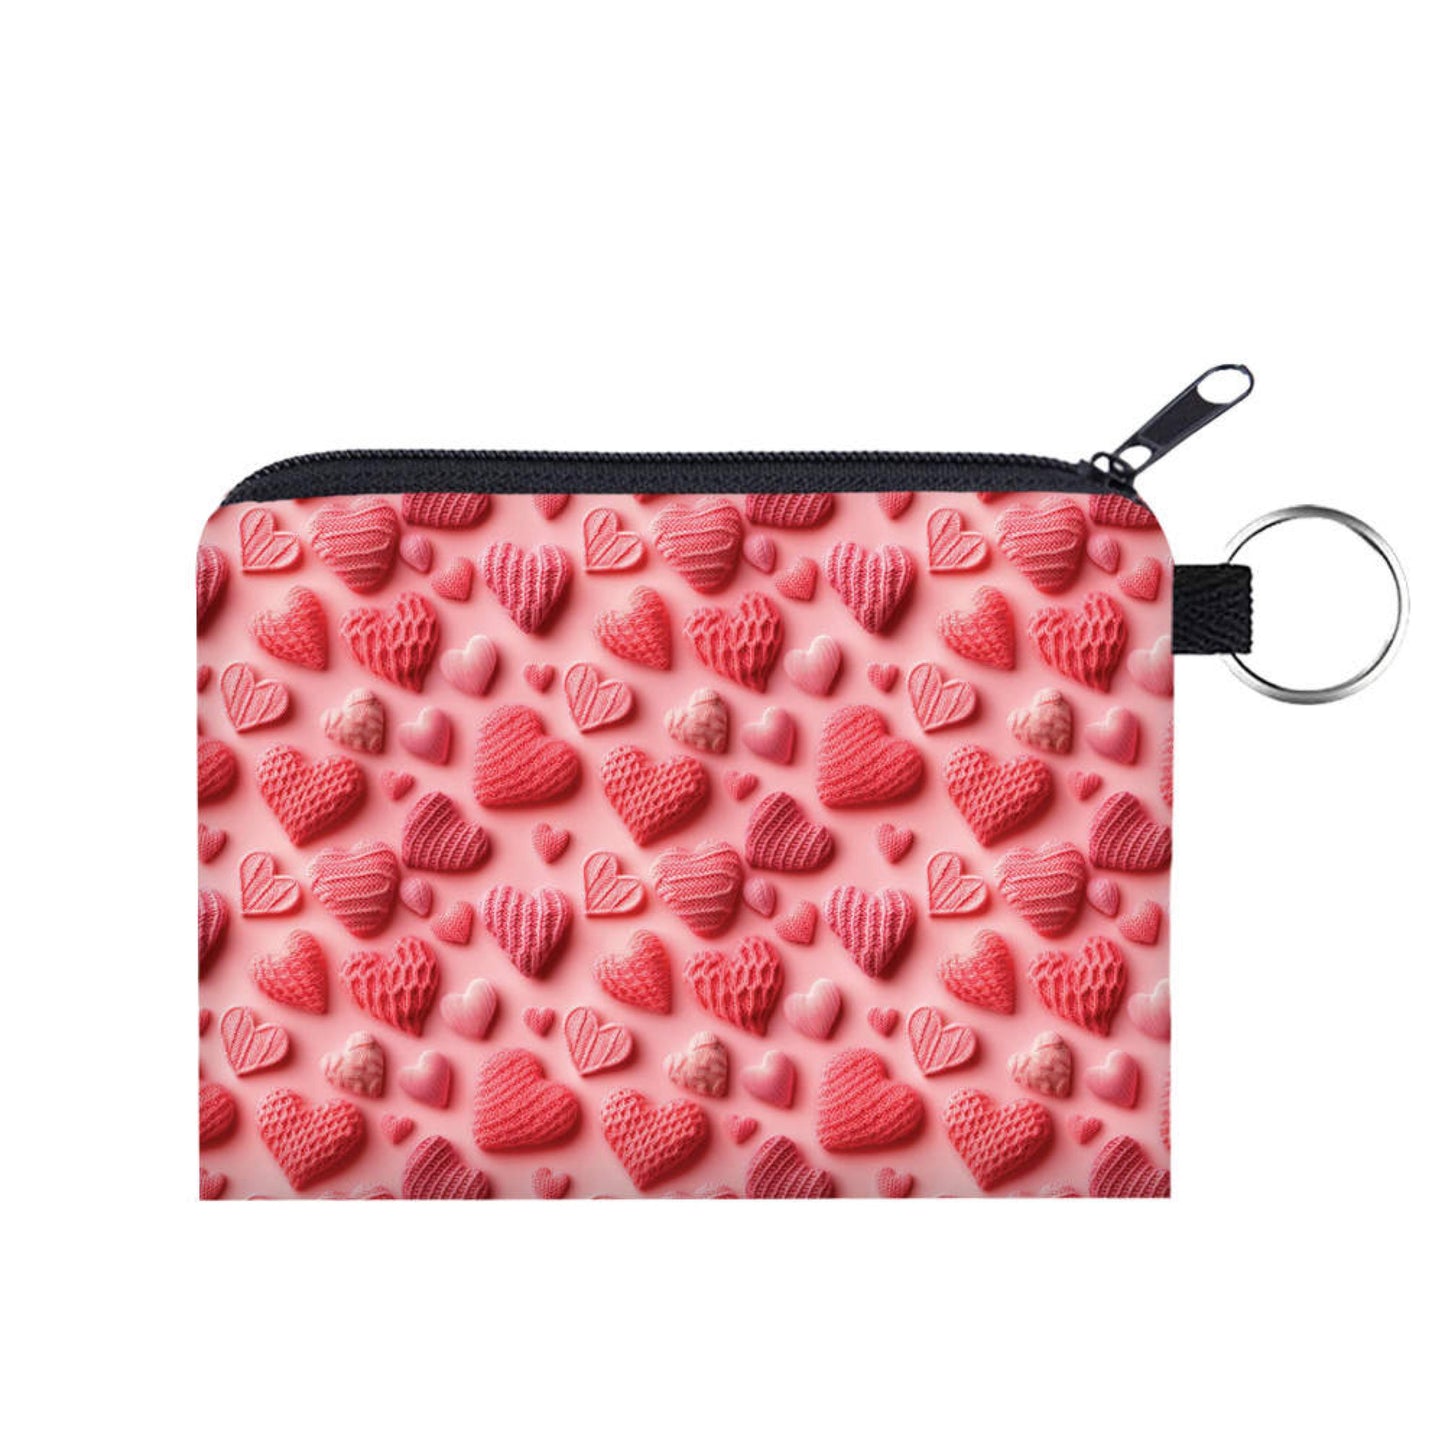 Mini Pouch - All Pink Knit Hearts